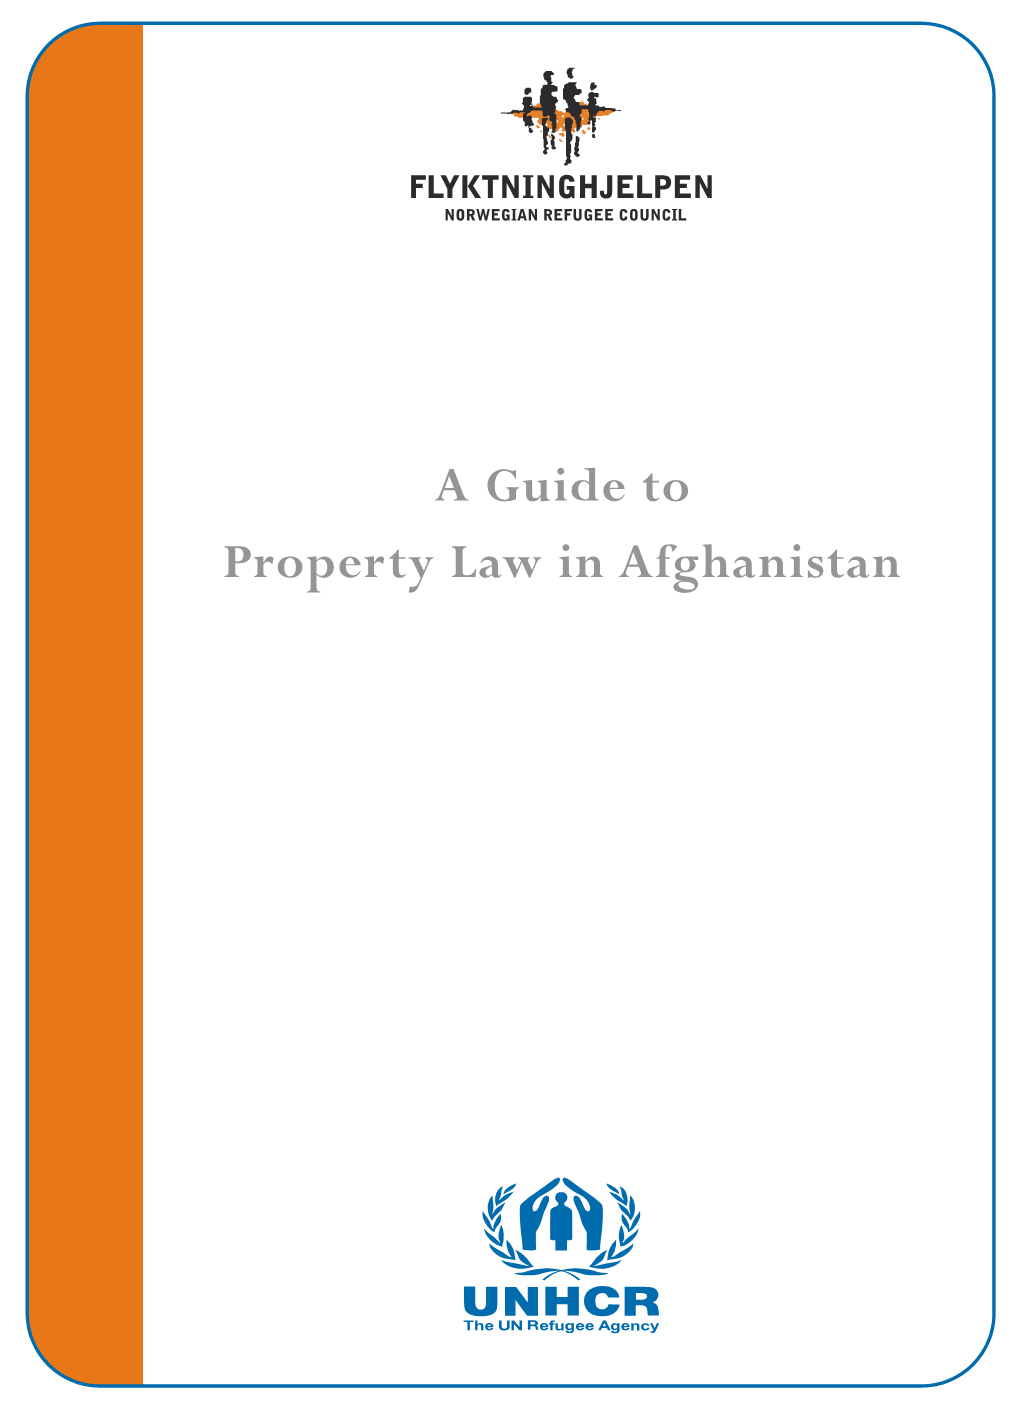 A Guide to Property Law in Afghanistan a Guide to Property Law in Afghanistan First Edition